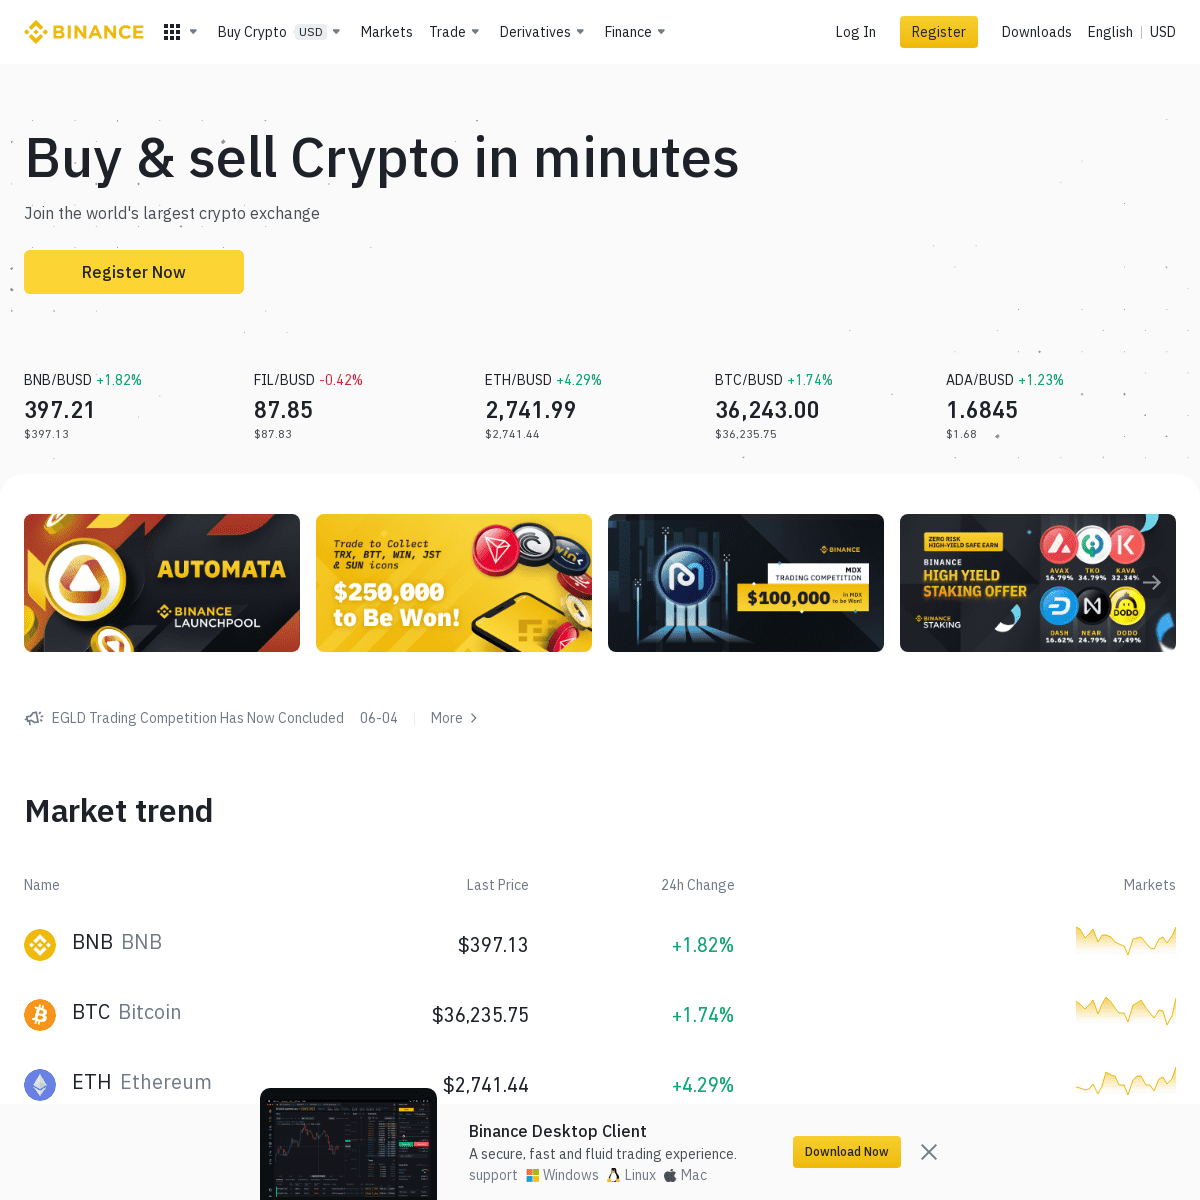 A complete backup of https://binance.cc